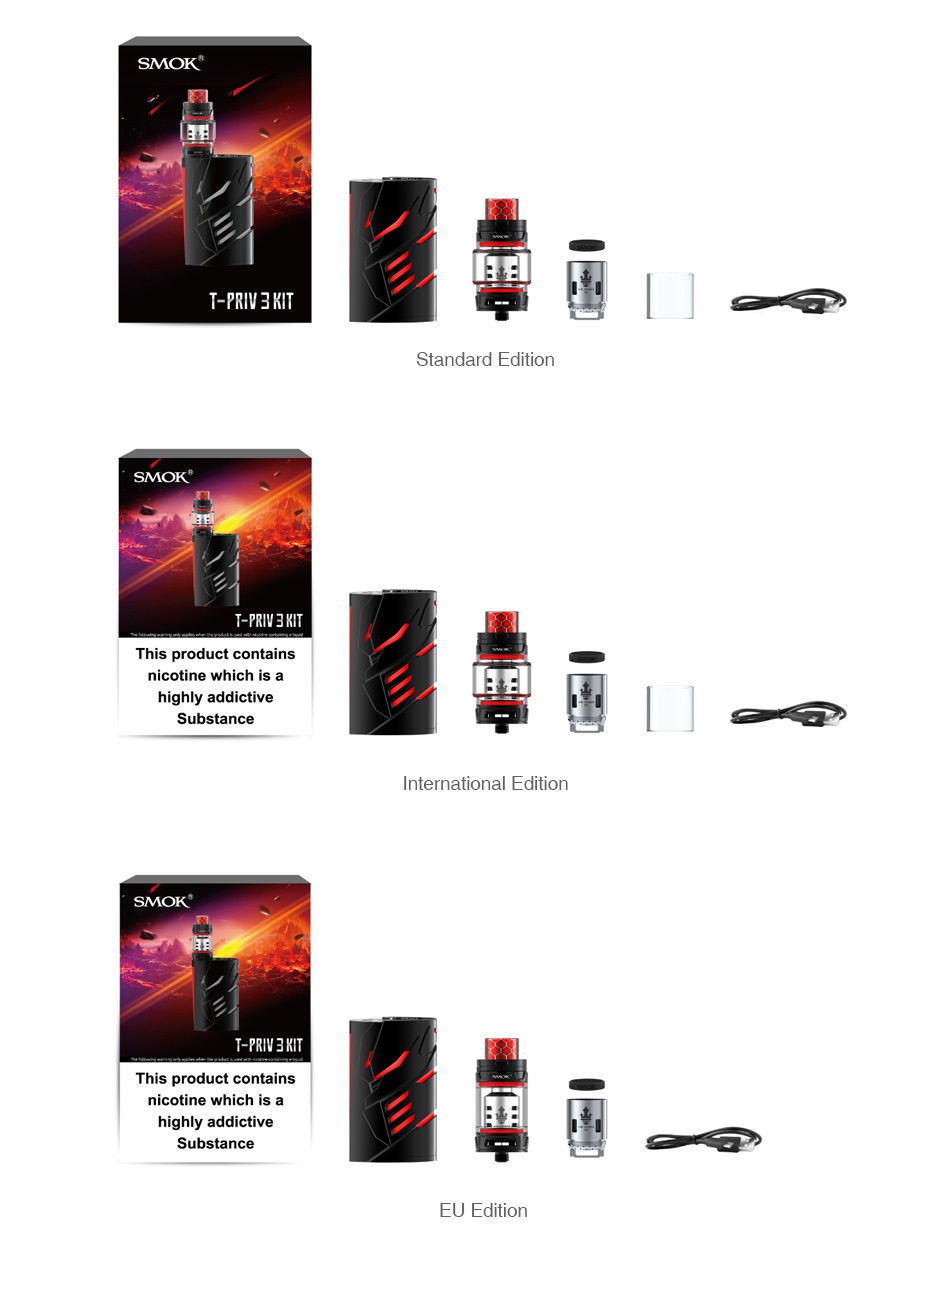 SMOK T-Priv 3 300W with TFV12 Prince TC Kit SMOK fal T PRIV 3 KIT Standard edition T PRIV 3 KIT This product contains nicotine which is a highly addictive Substance International edition SMOK T PRIV3 KIT This product contains nicotine which is a Substance EU Edition